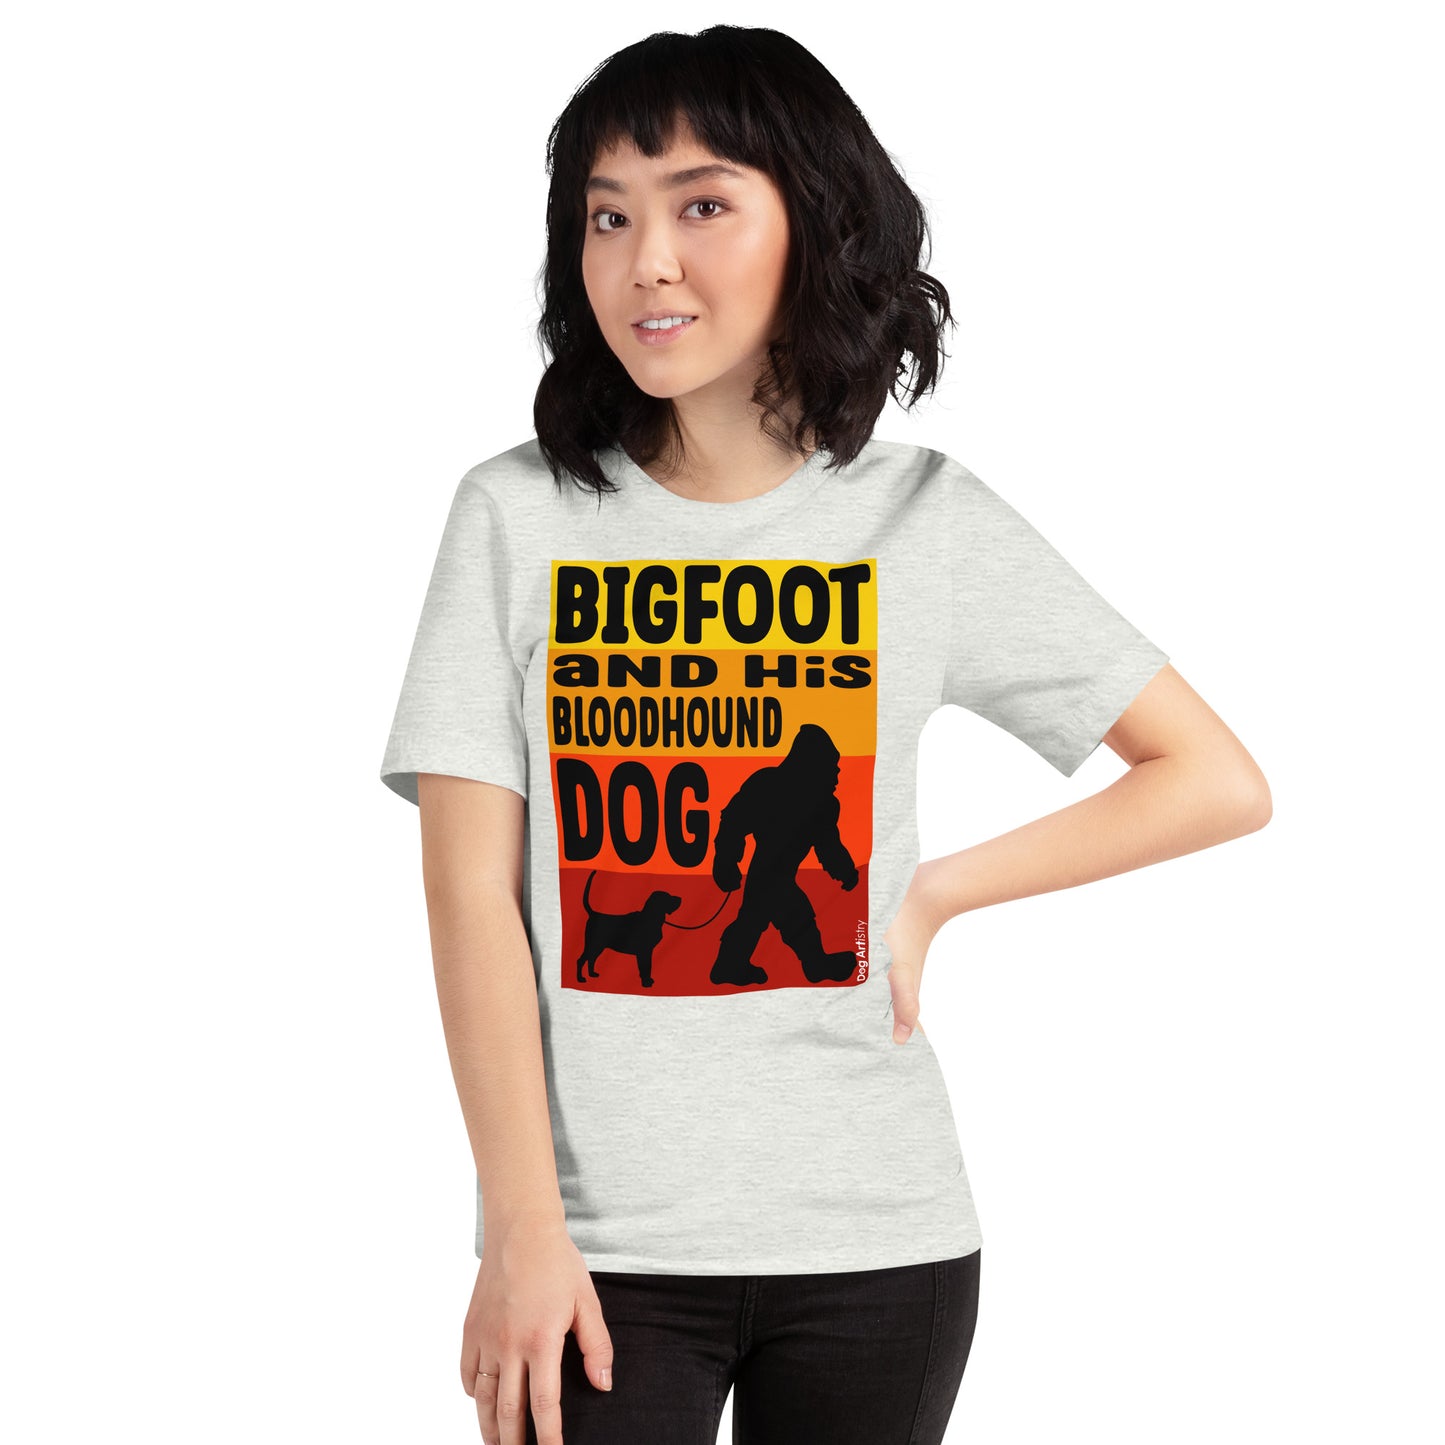 Big foot and his Bloodhound unisex ash t-shirt by Dog Artistry.